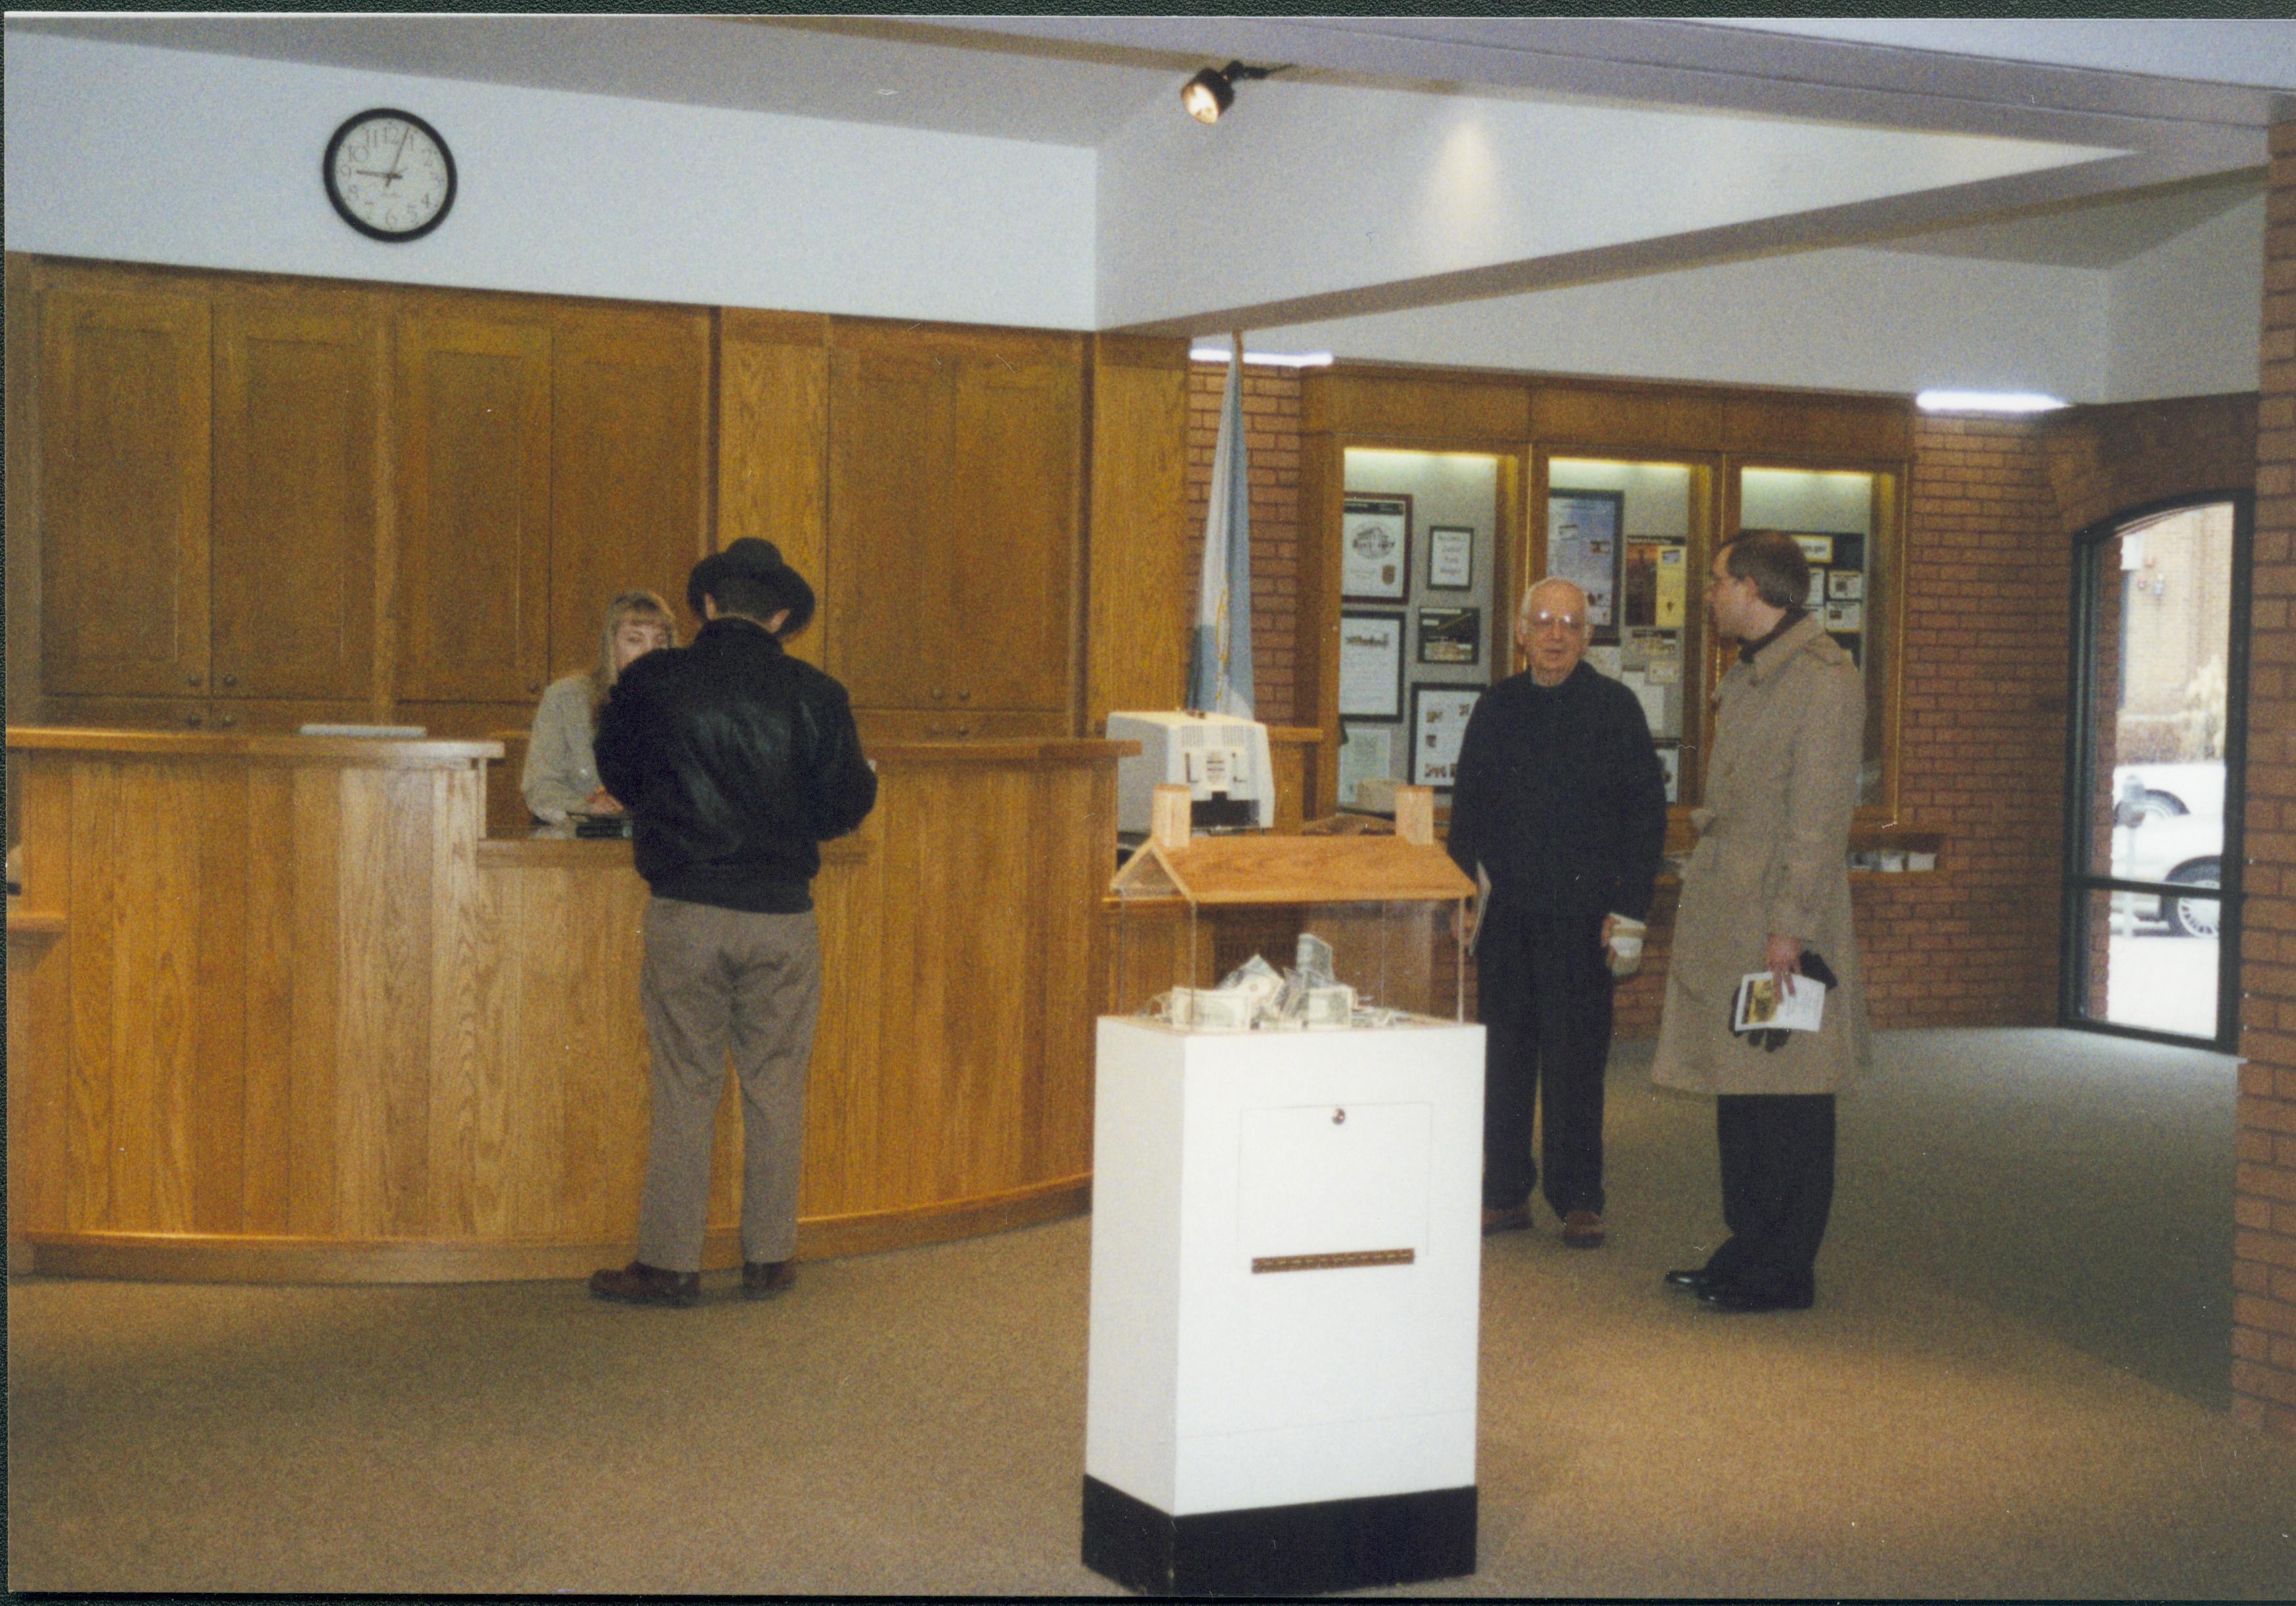 Stephanie at V.C. desk Lincoln Home NHS- Lincoln Birthday, George Painter Lectures, Roll 2001-1 exp 17 reception, lecture